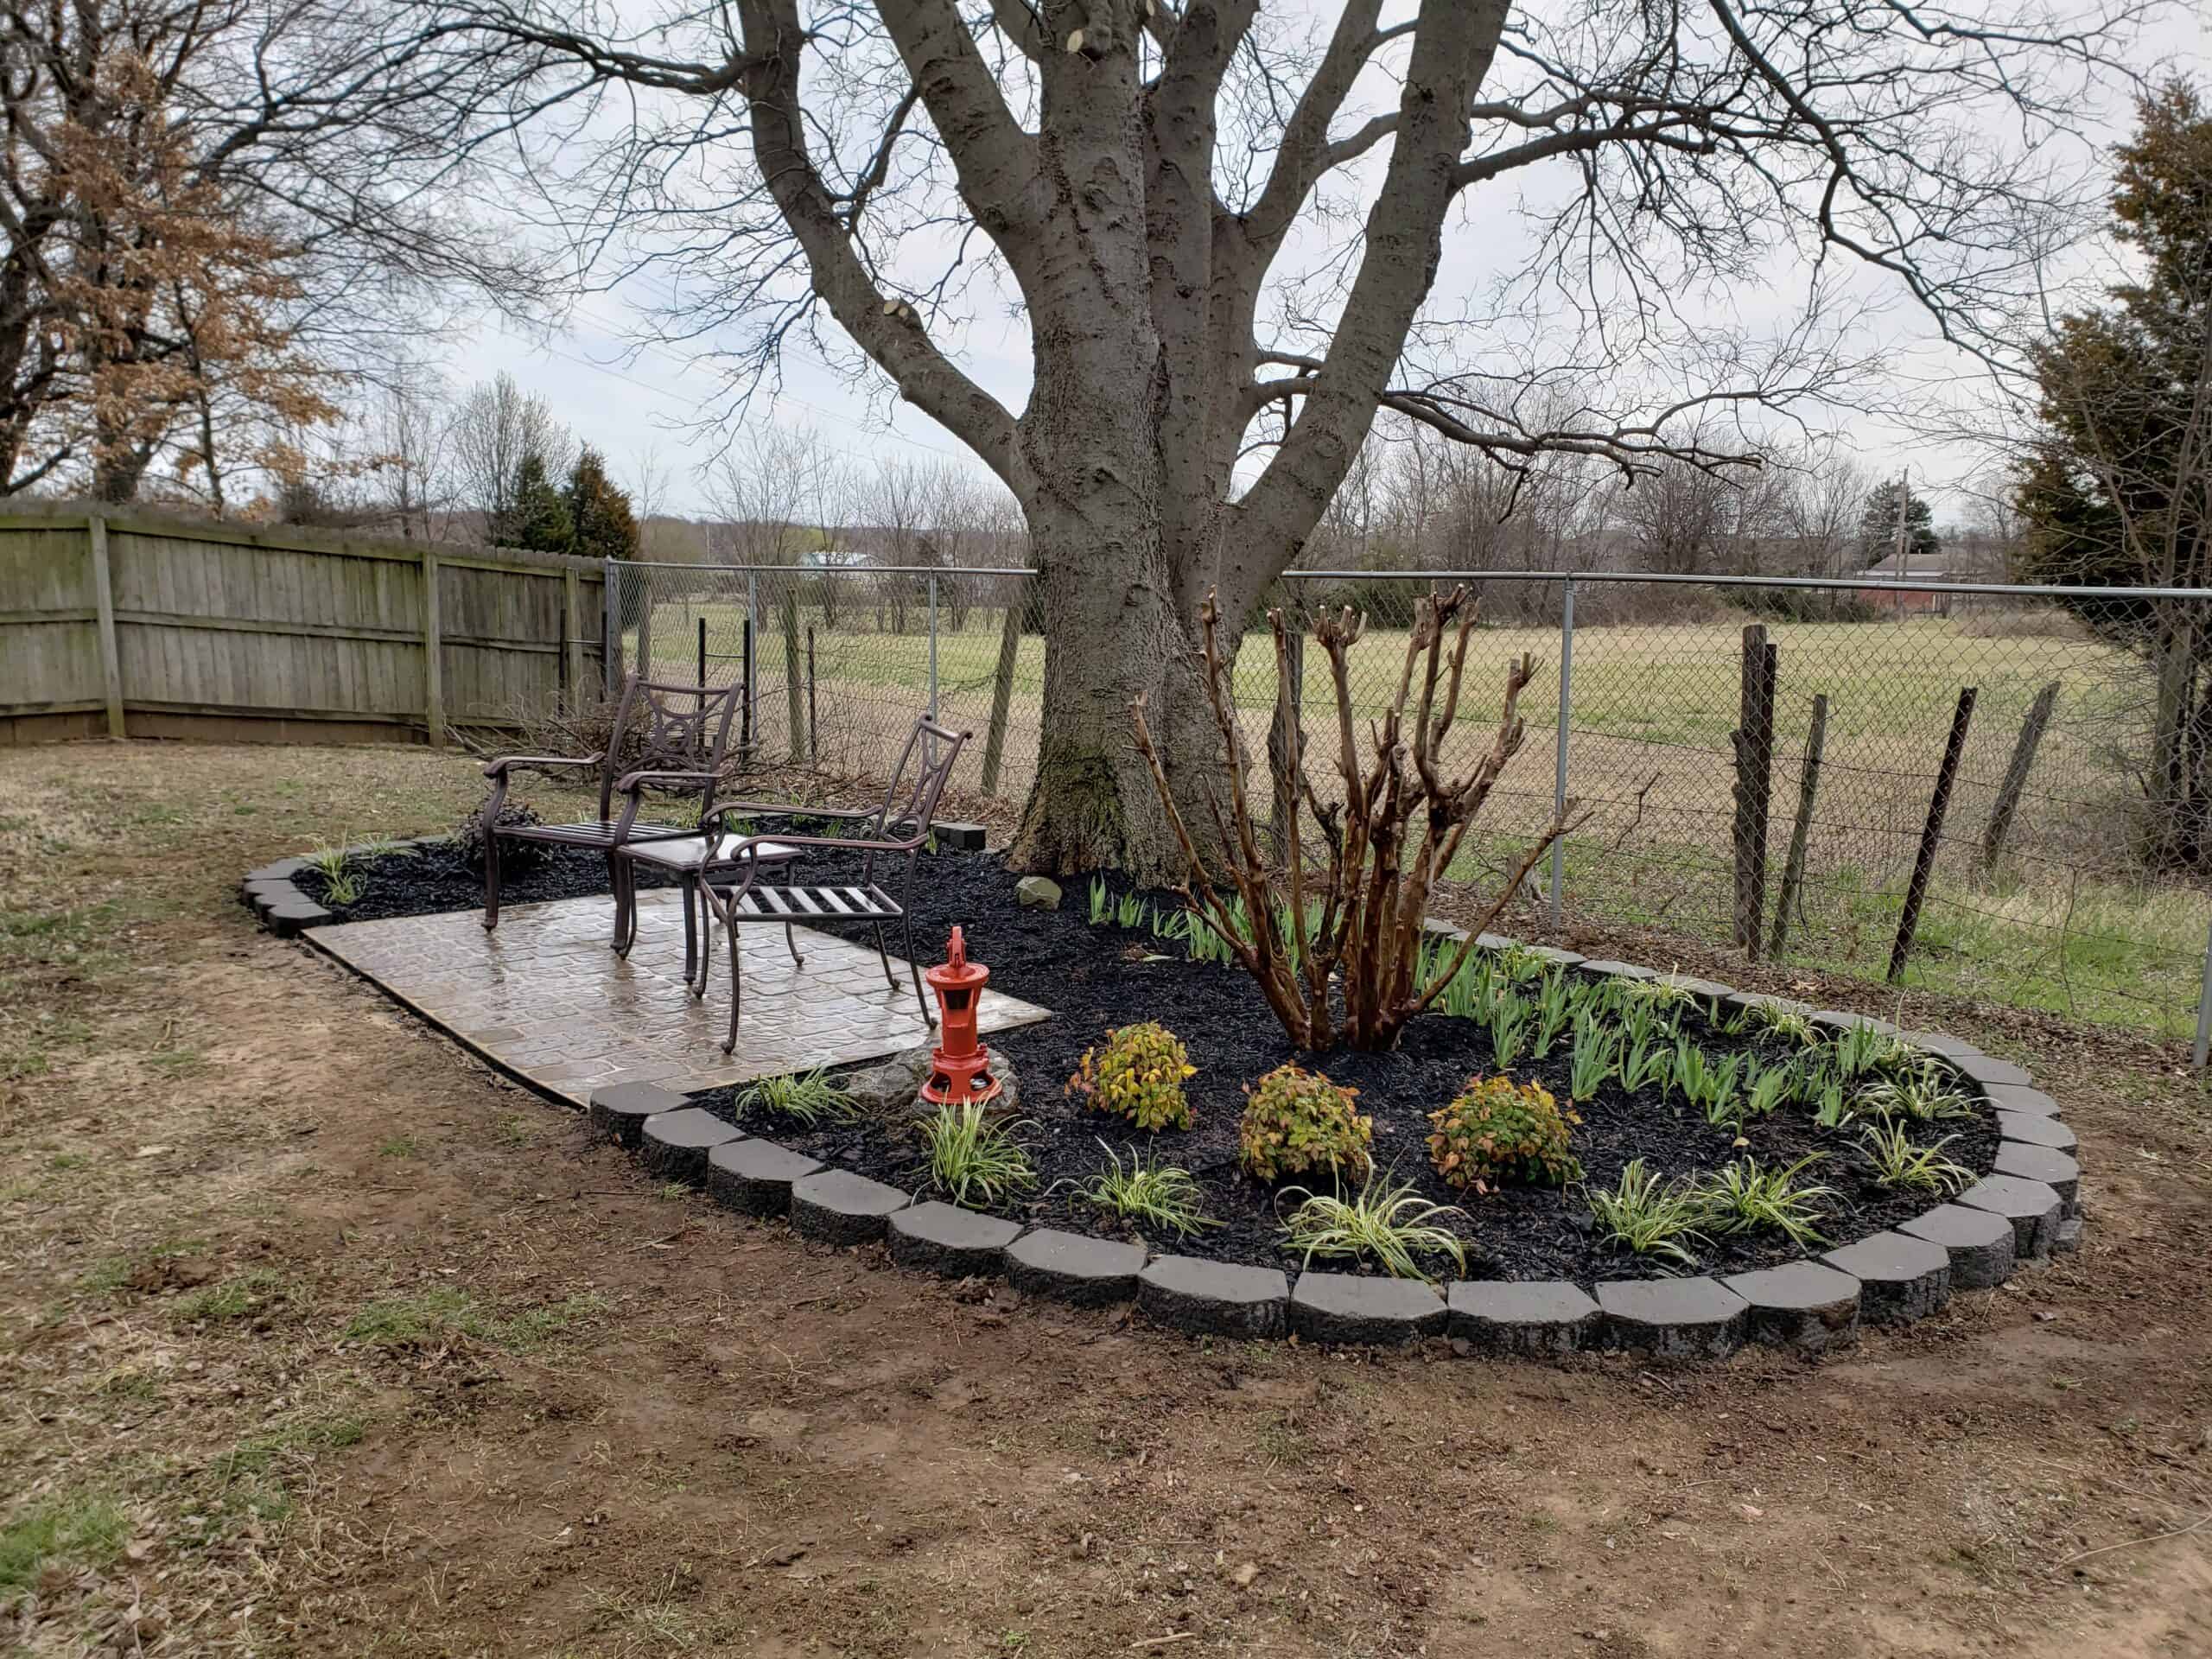 Landscaping for allergies in Oklahoma requires professional landscape design